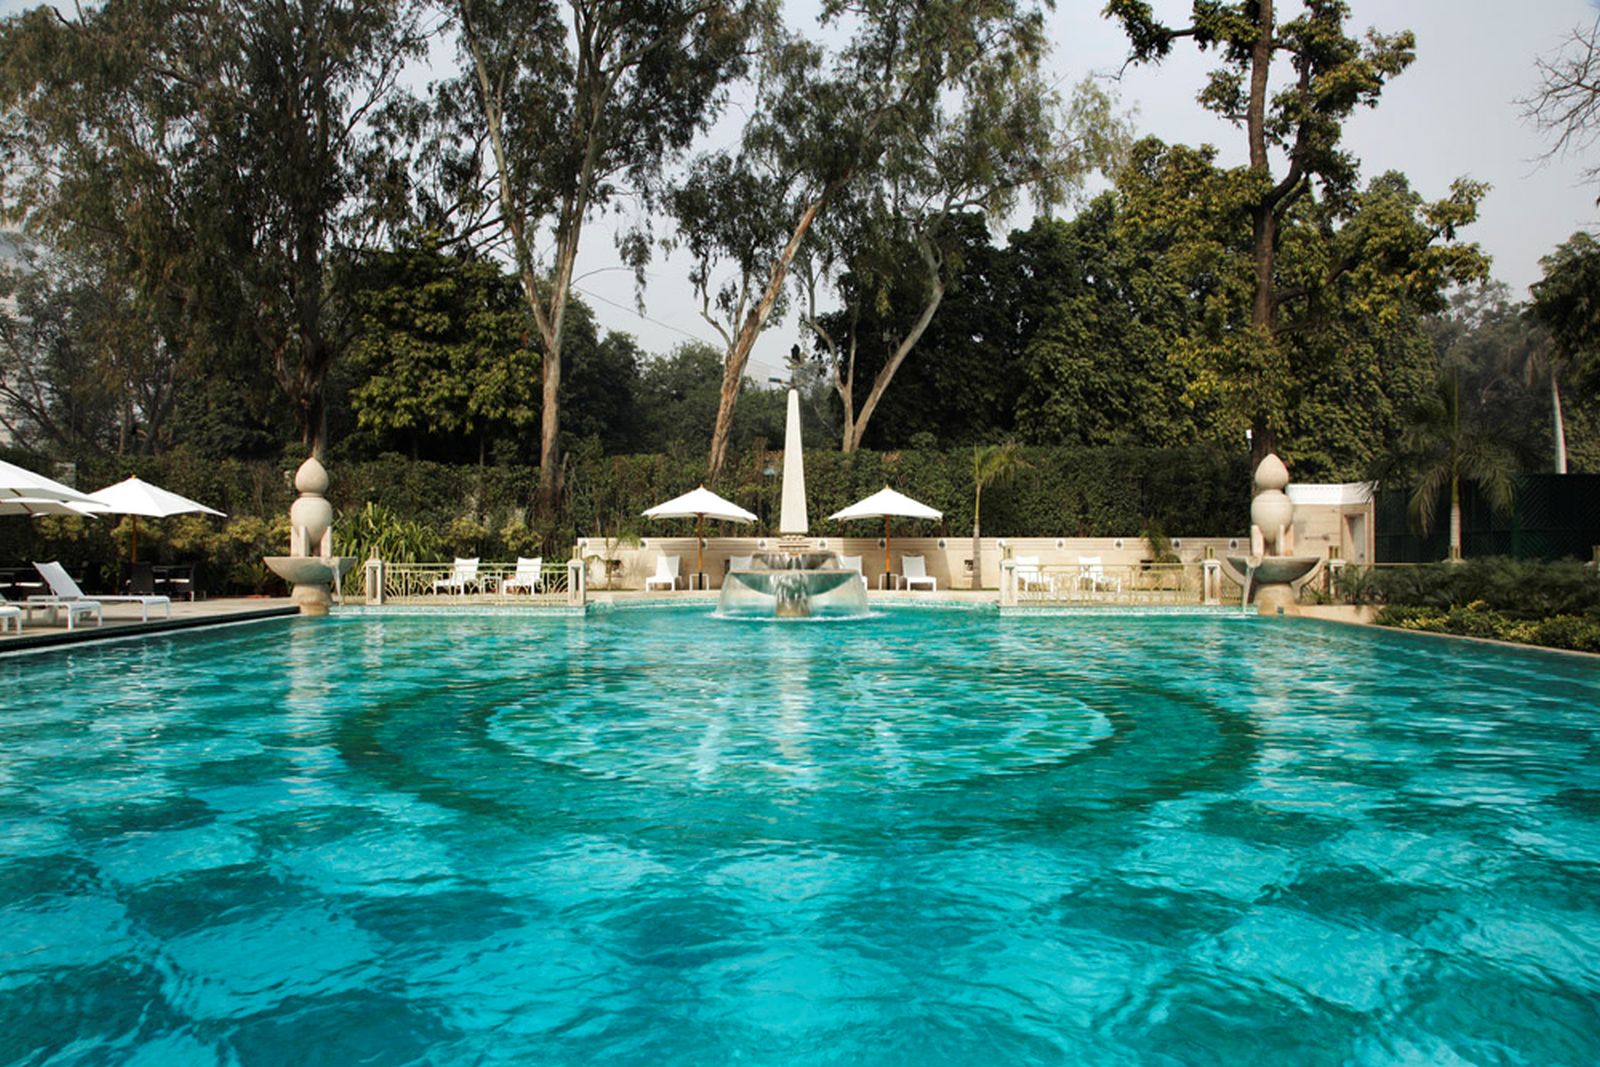 Swimming pool at the Imperial New Delhi